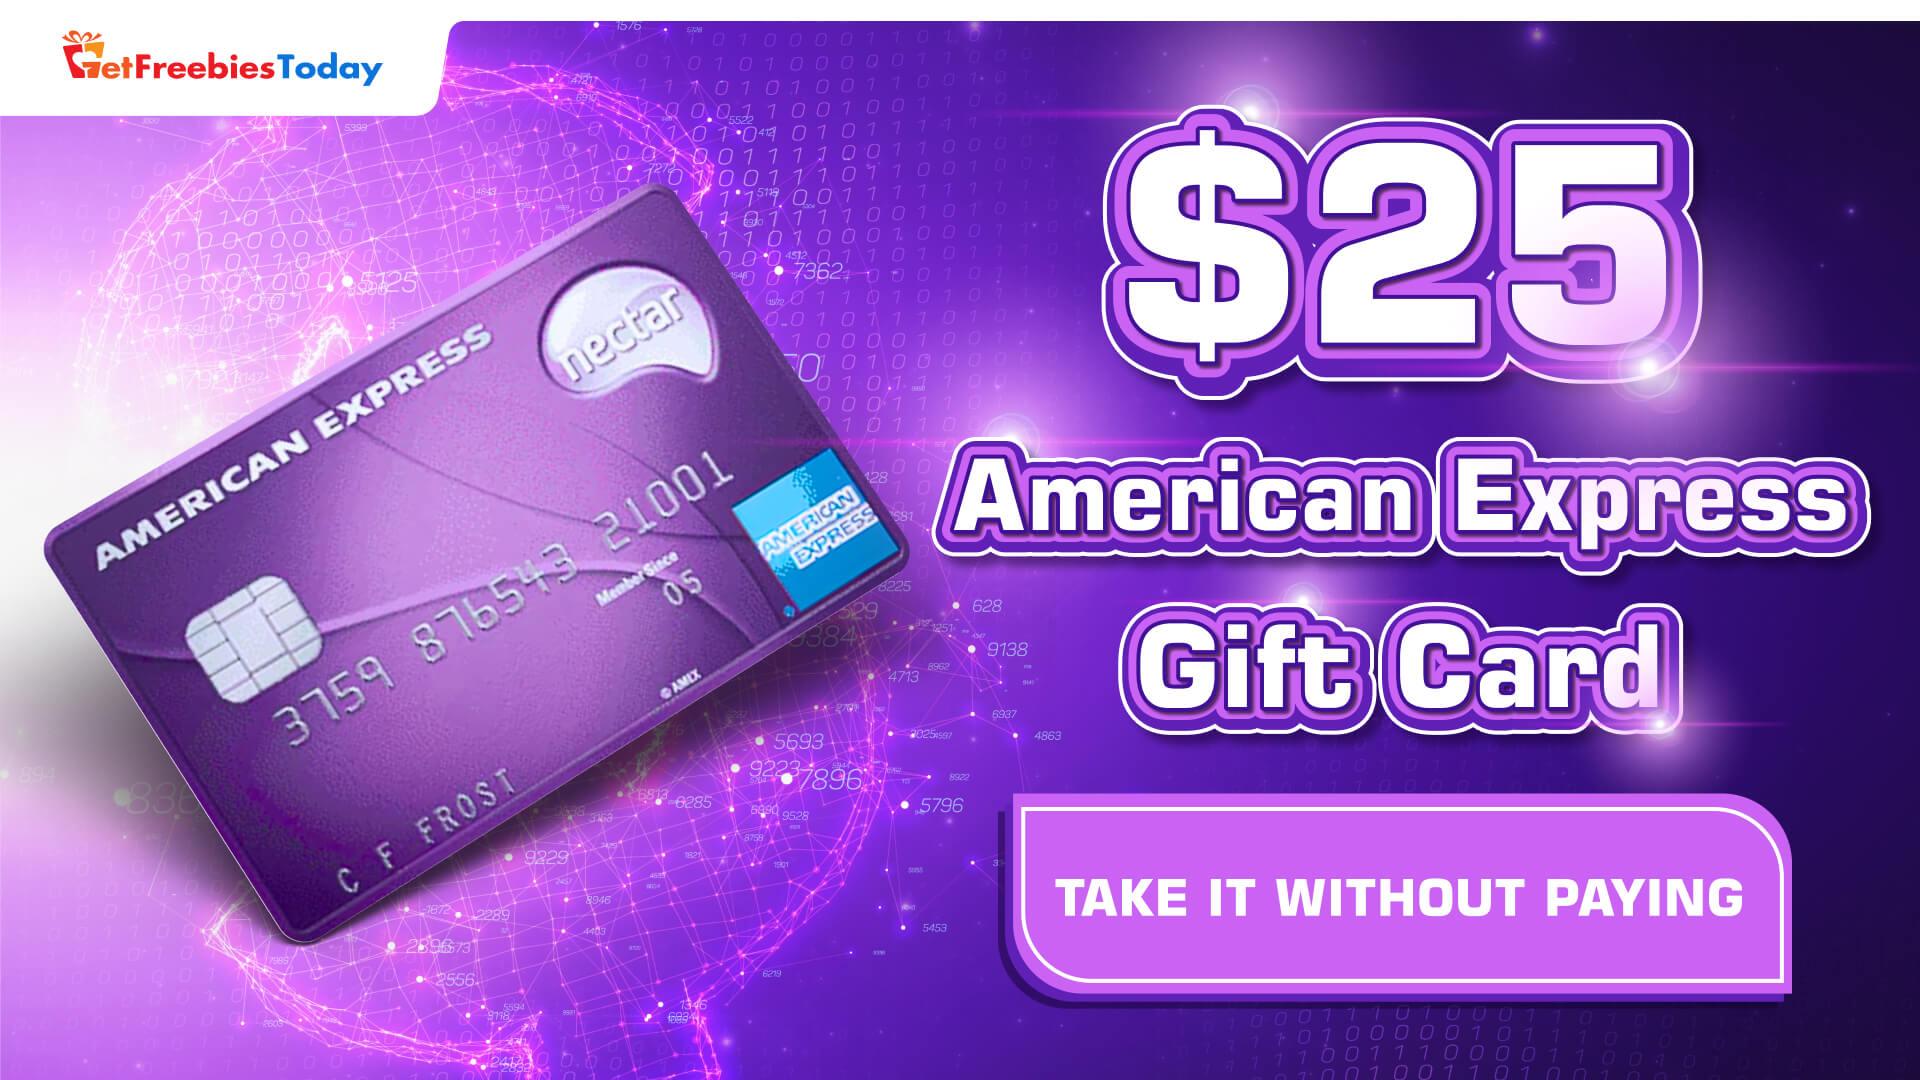 Receive $25 American Express Gift Card Effortlessly